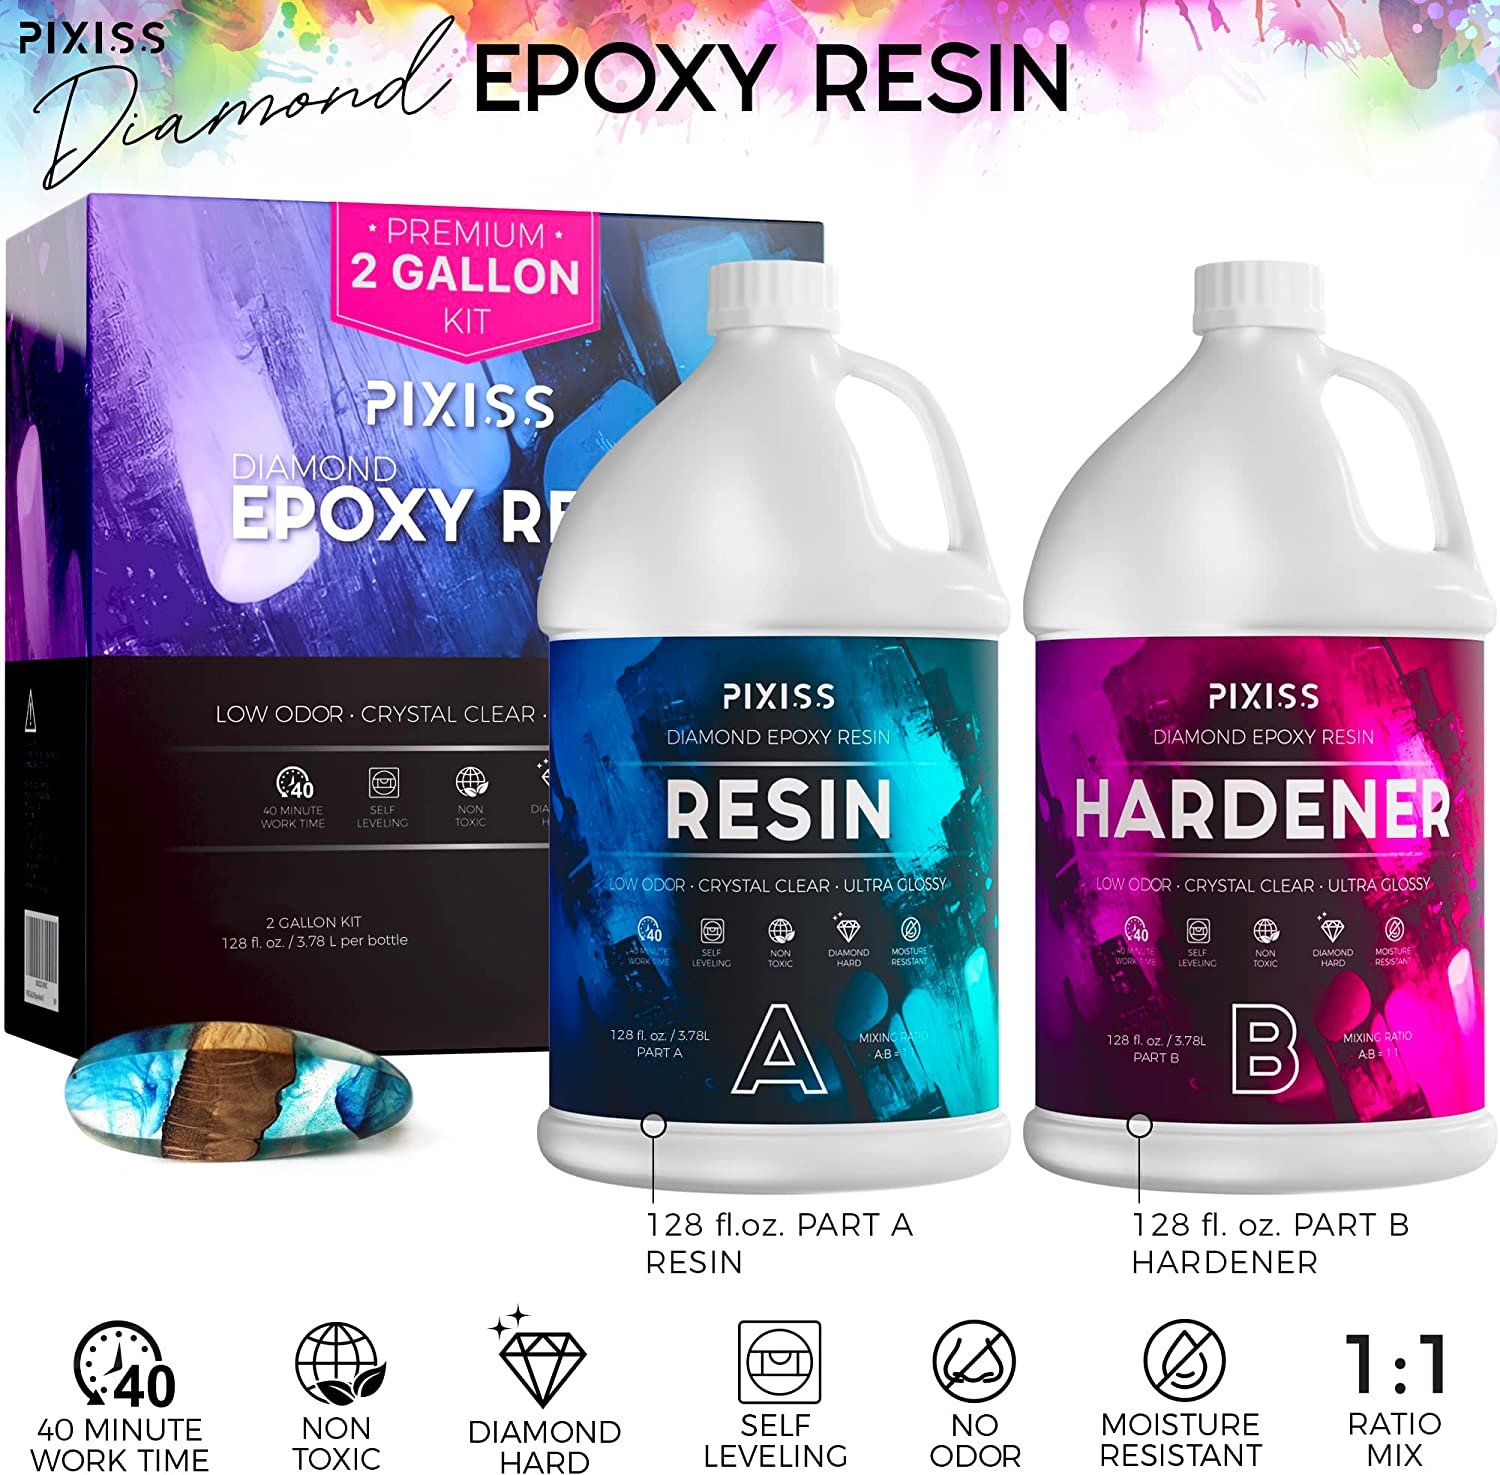 Epoxy Resin Crystal Clear Casting Resin for Epoxy and Resin Art Pixiss Brand Easy Mix 2 Gallon Kit Supplies for Tumblers, Jewelry Resin, Molds